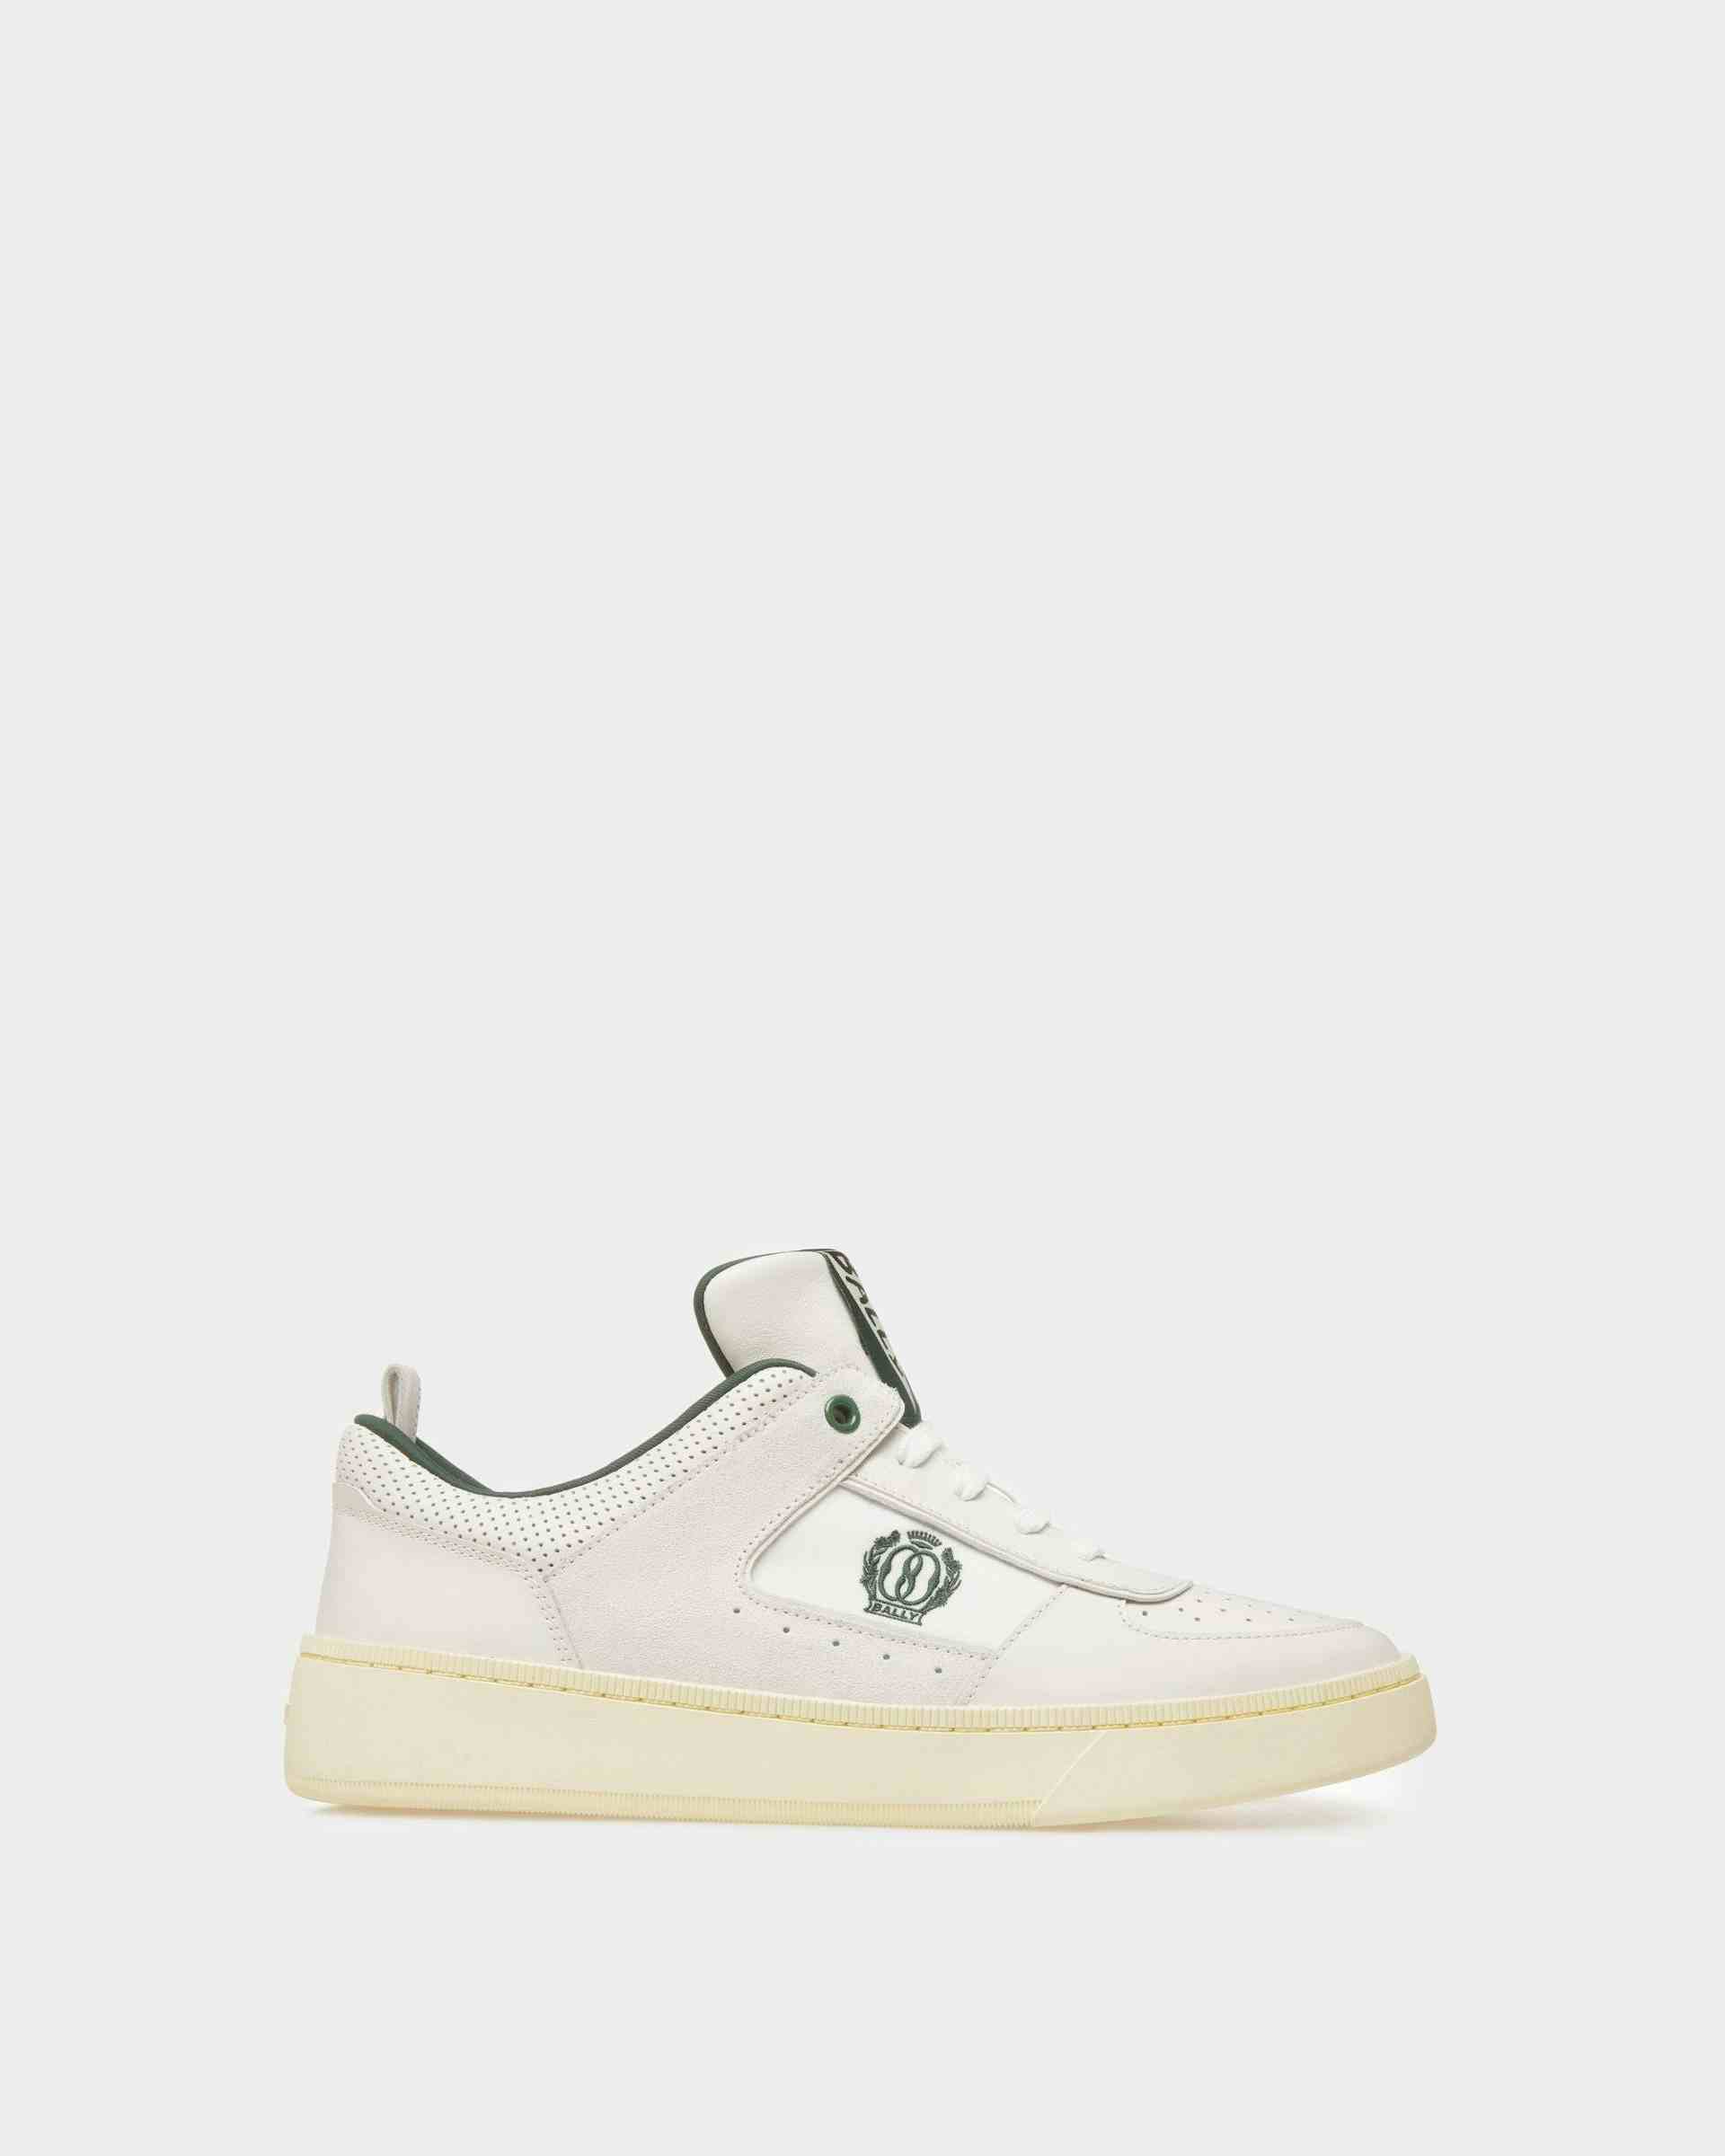 Raise Sneakers In White Leather - Men's - Bally